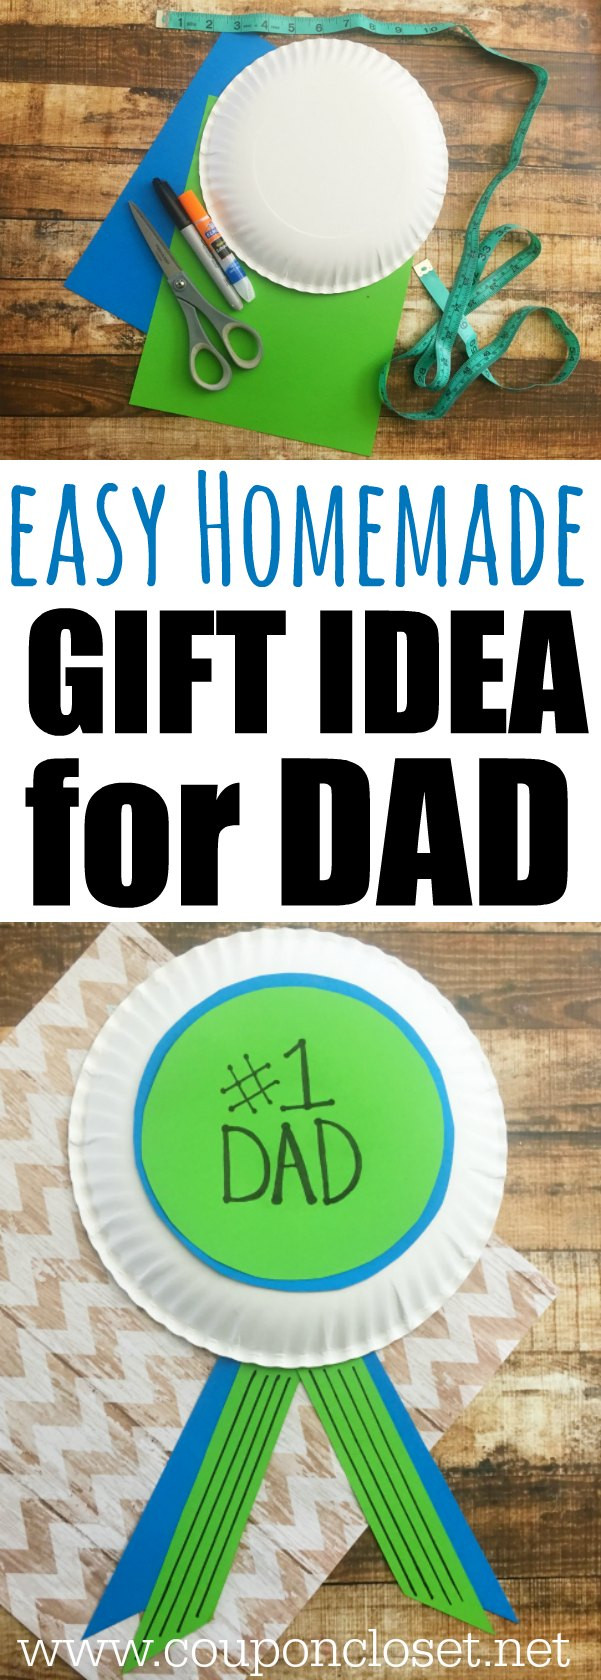 Easy DIY Father'S Day Gifts
 Homemade Father s Day Gift Idea 1 Dad Award Coupon Closet